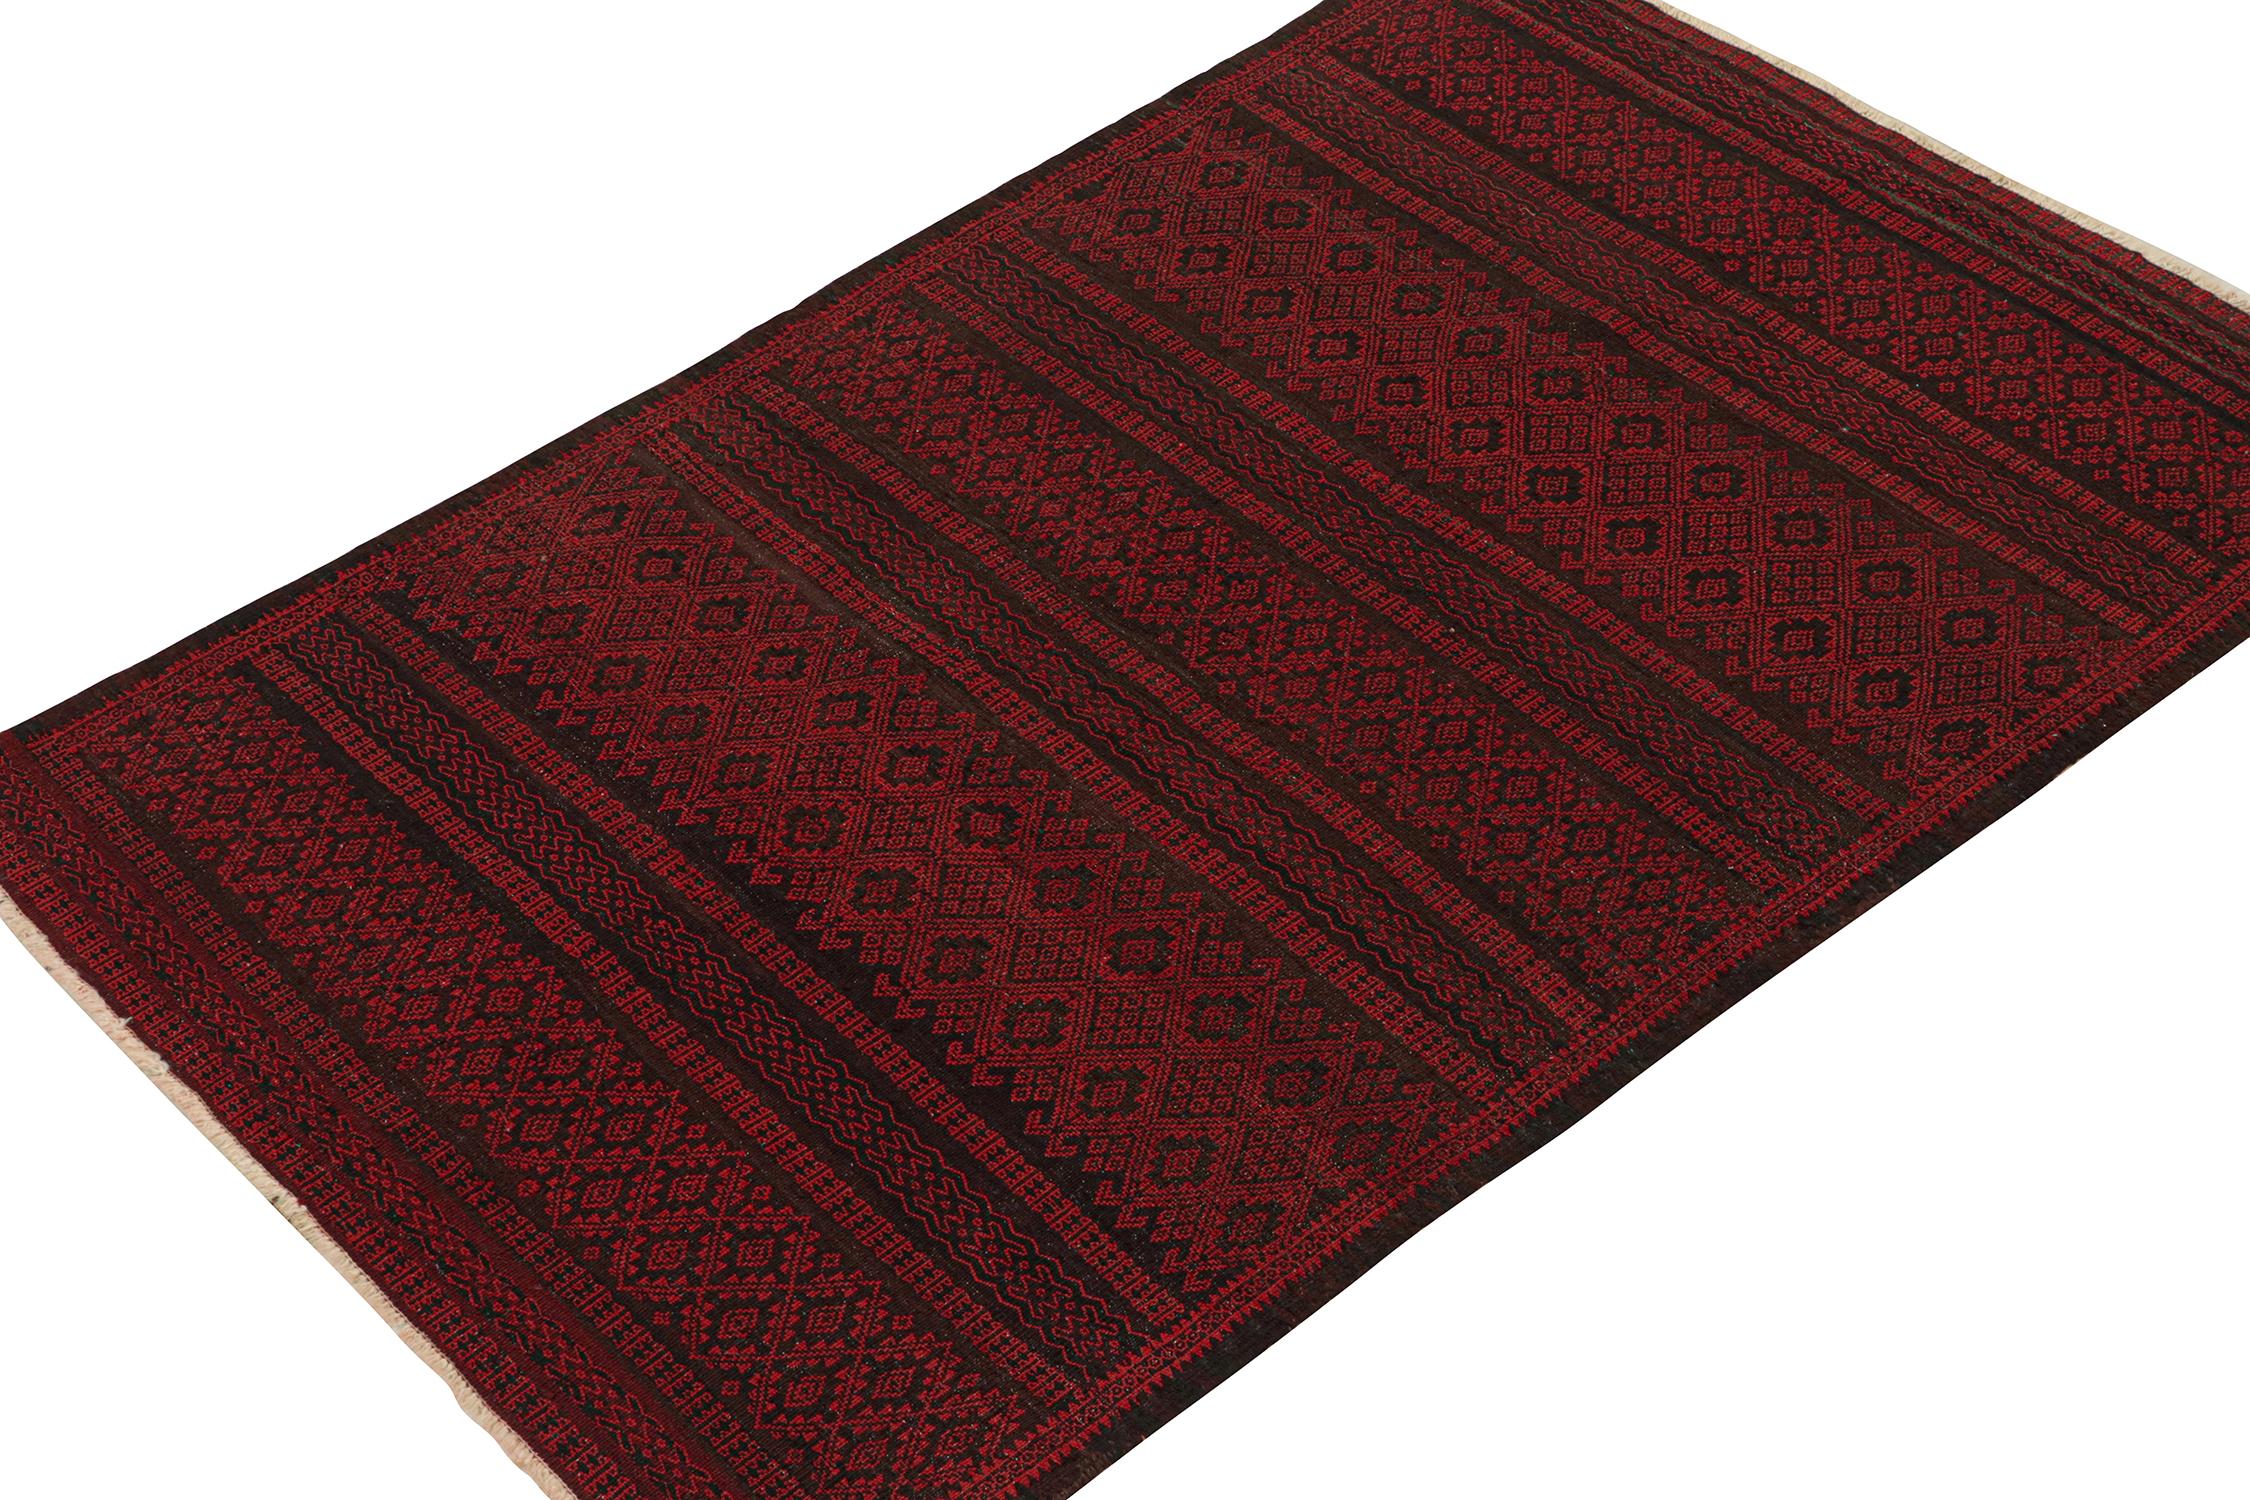 Tribal Vintage Persian Kilim in Red and Black Geometric Patterns by Rug & Kilim For Sale